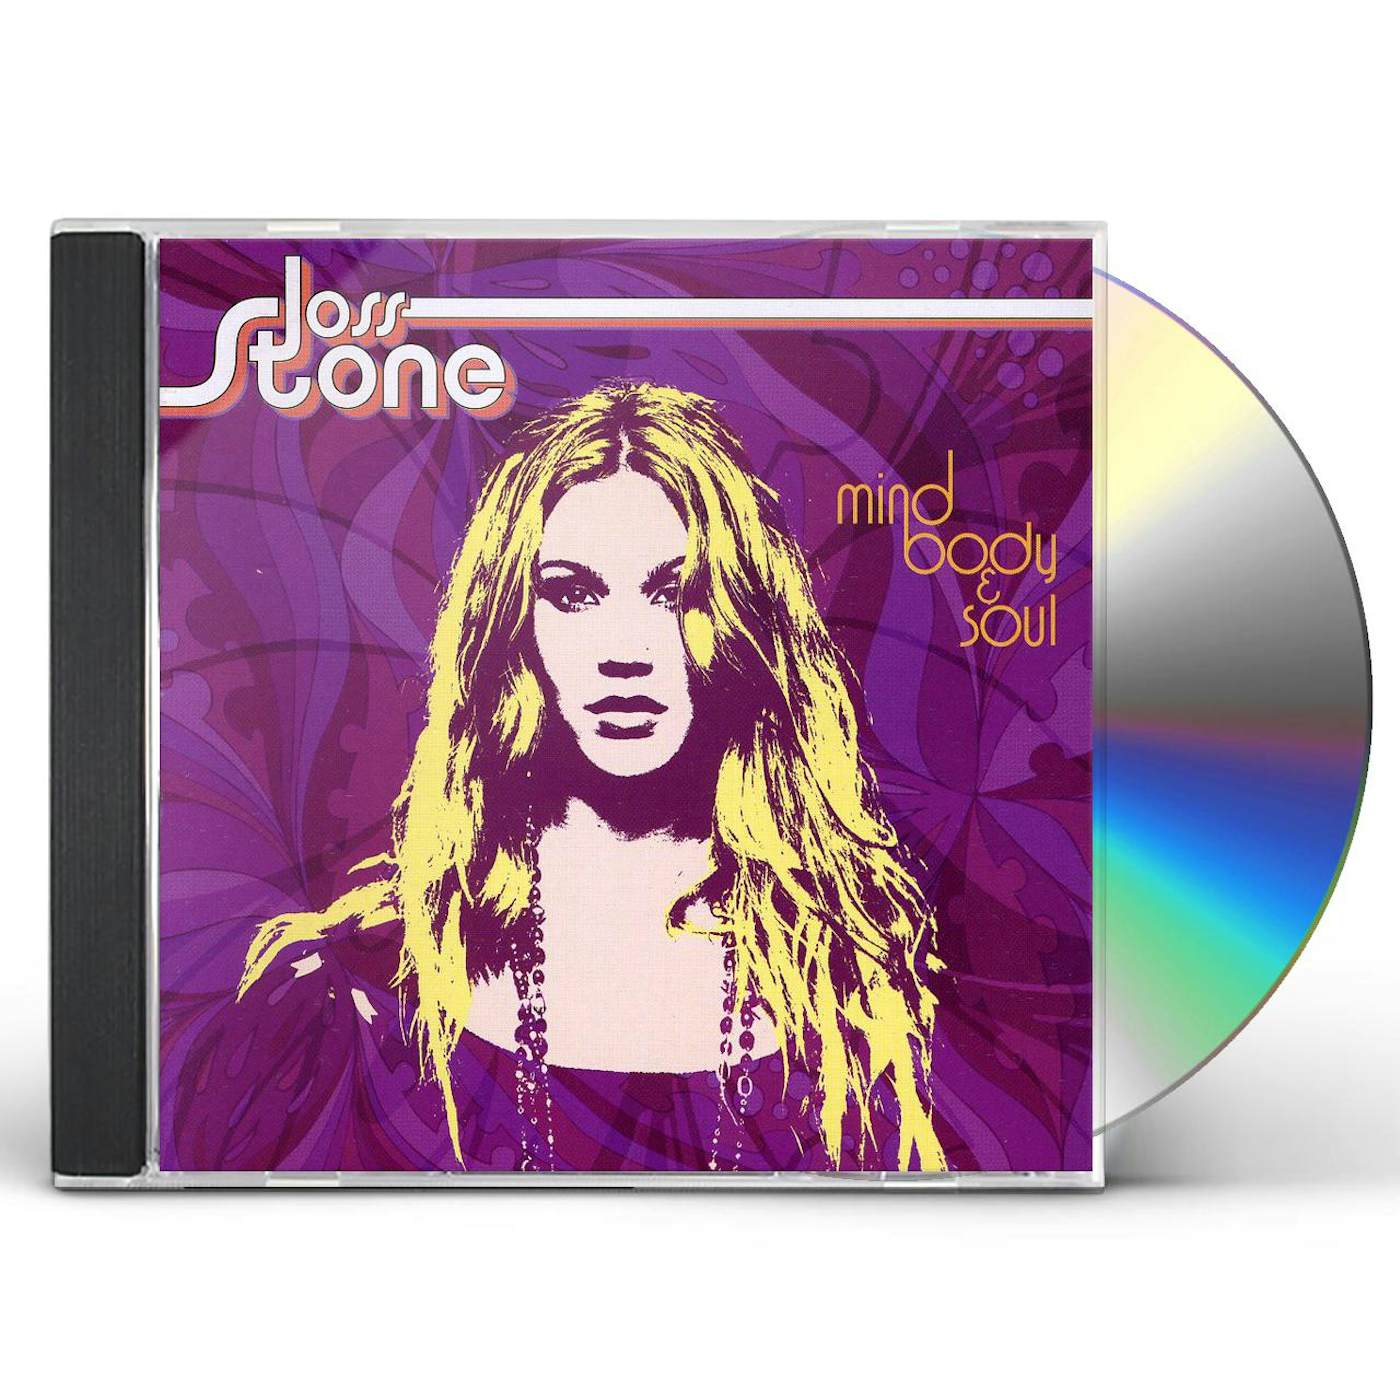 Joss Stone WATER FOR YOUR SOUL CD $14.99$13.49